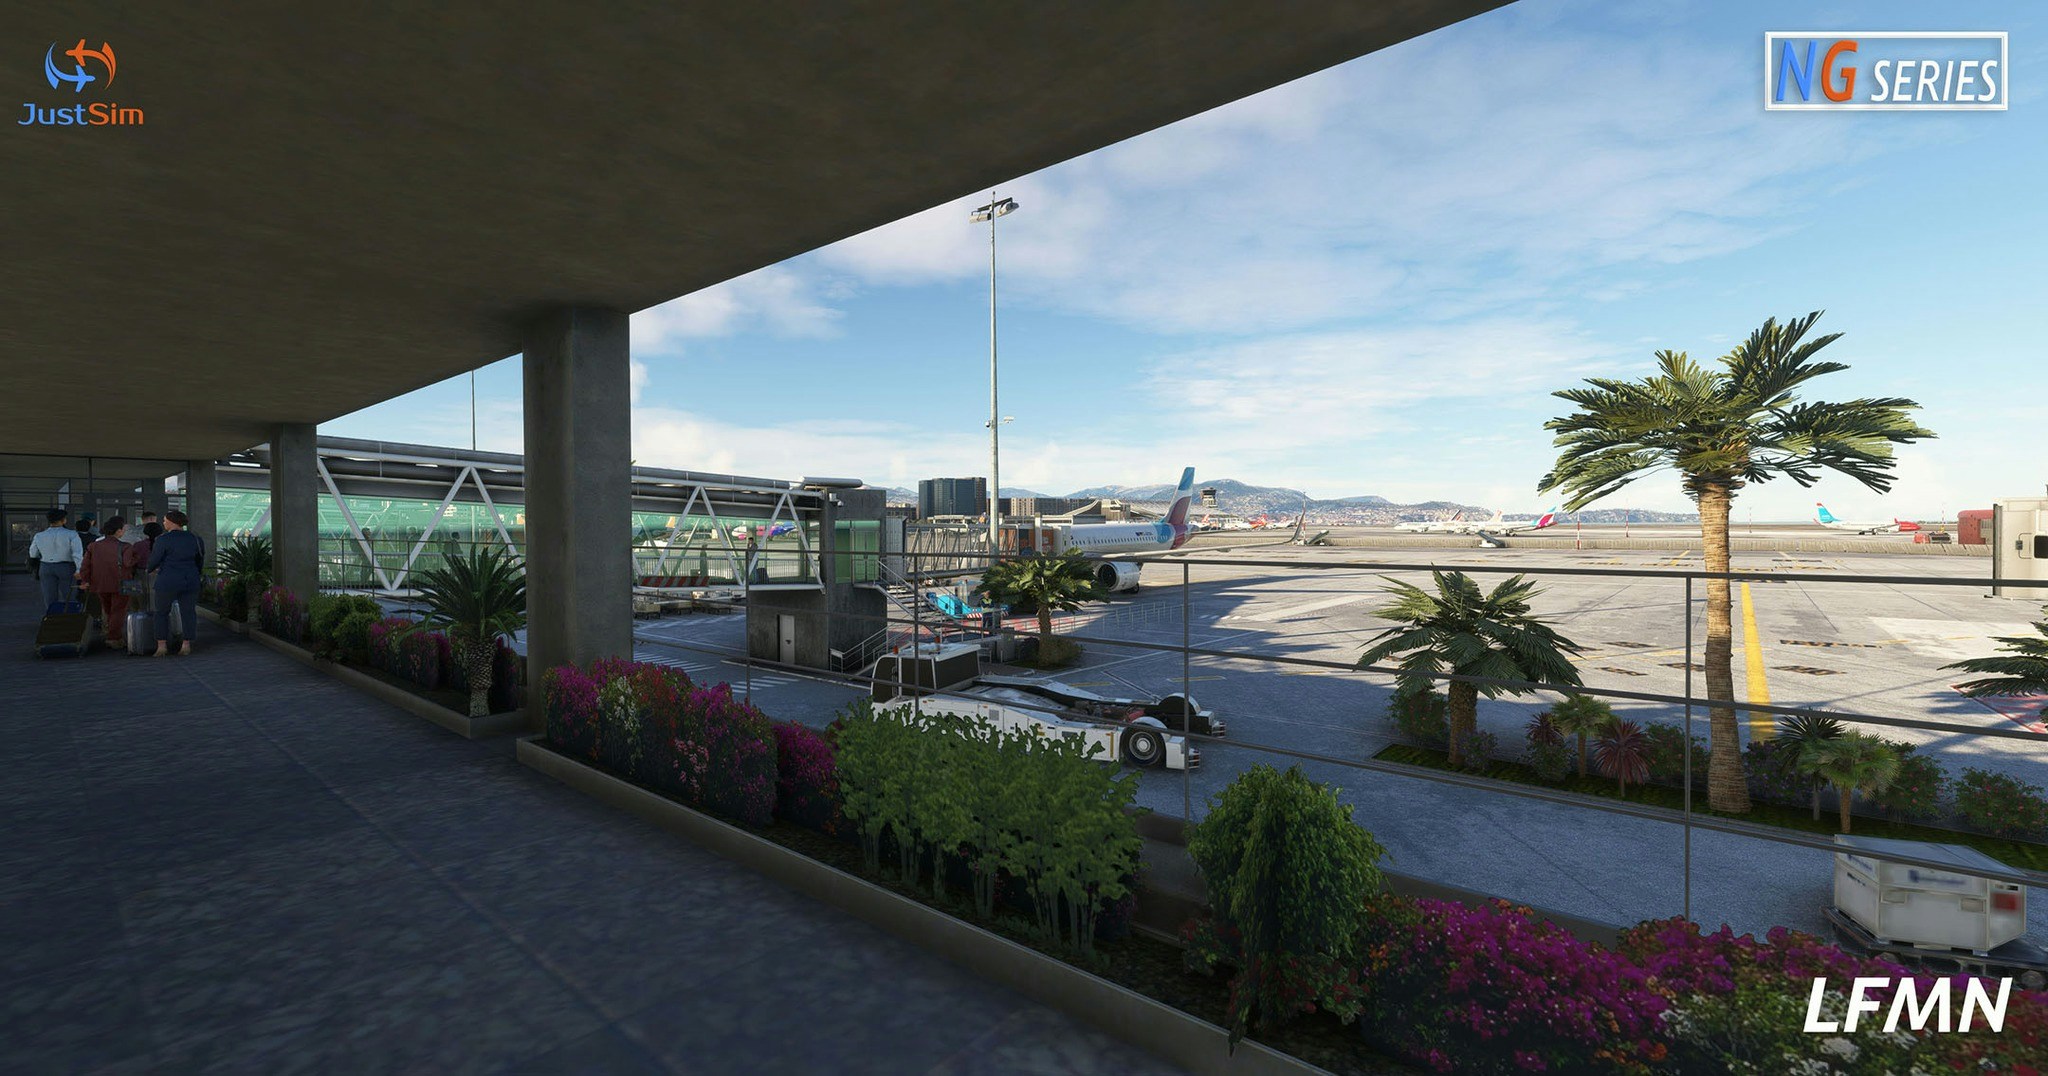 JustSim Announces "NG Series" Product Line, Releases Cote d'Azur Airport for MSFS